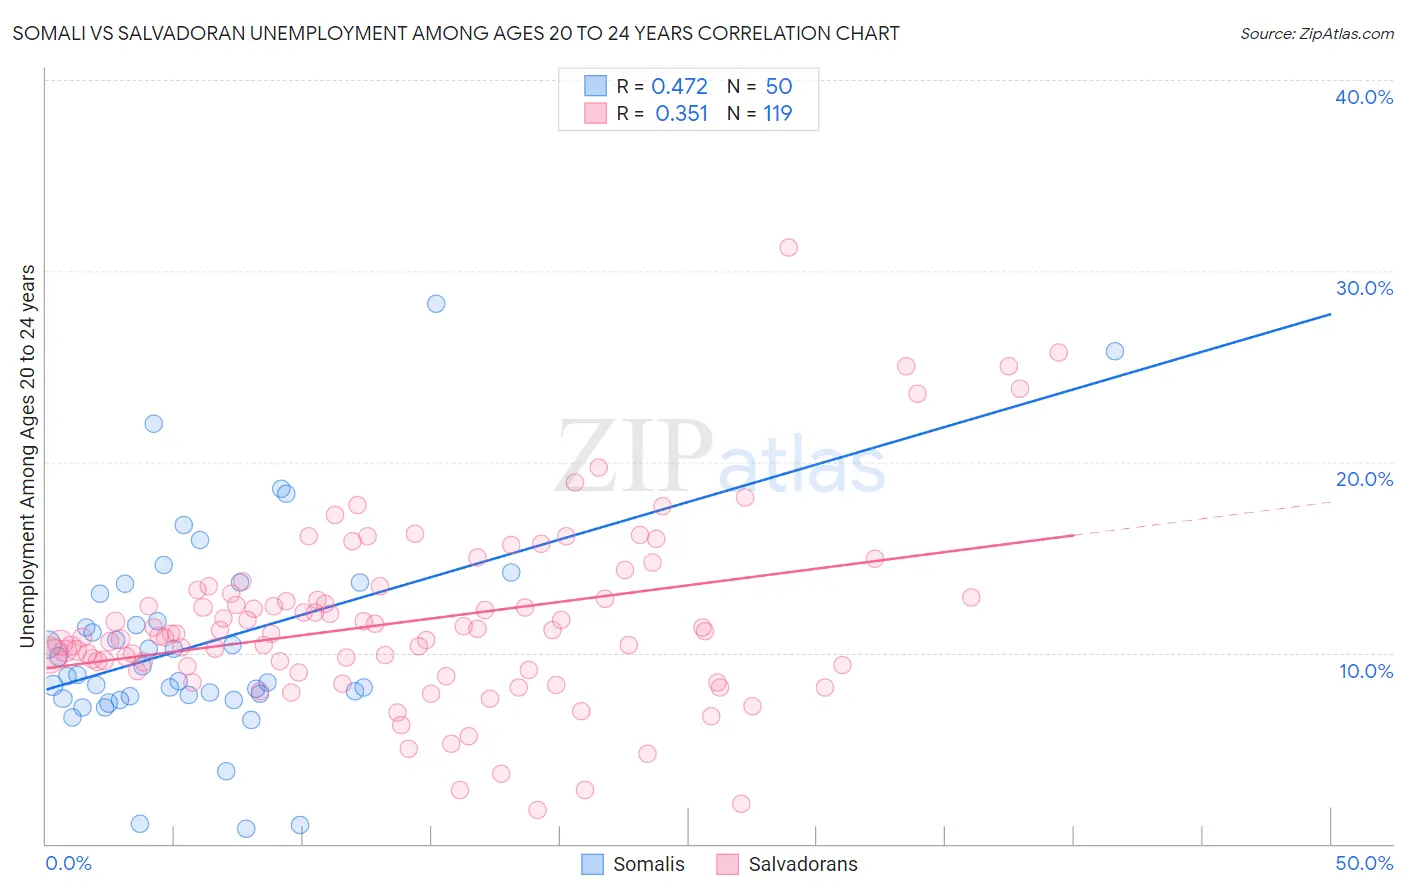 Somali vs Salvadoran Unemployment Among Ages 20 to 24 years